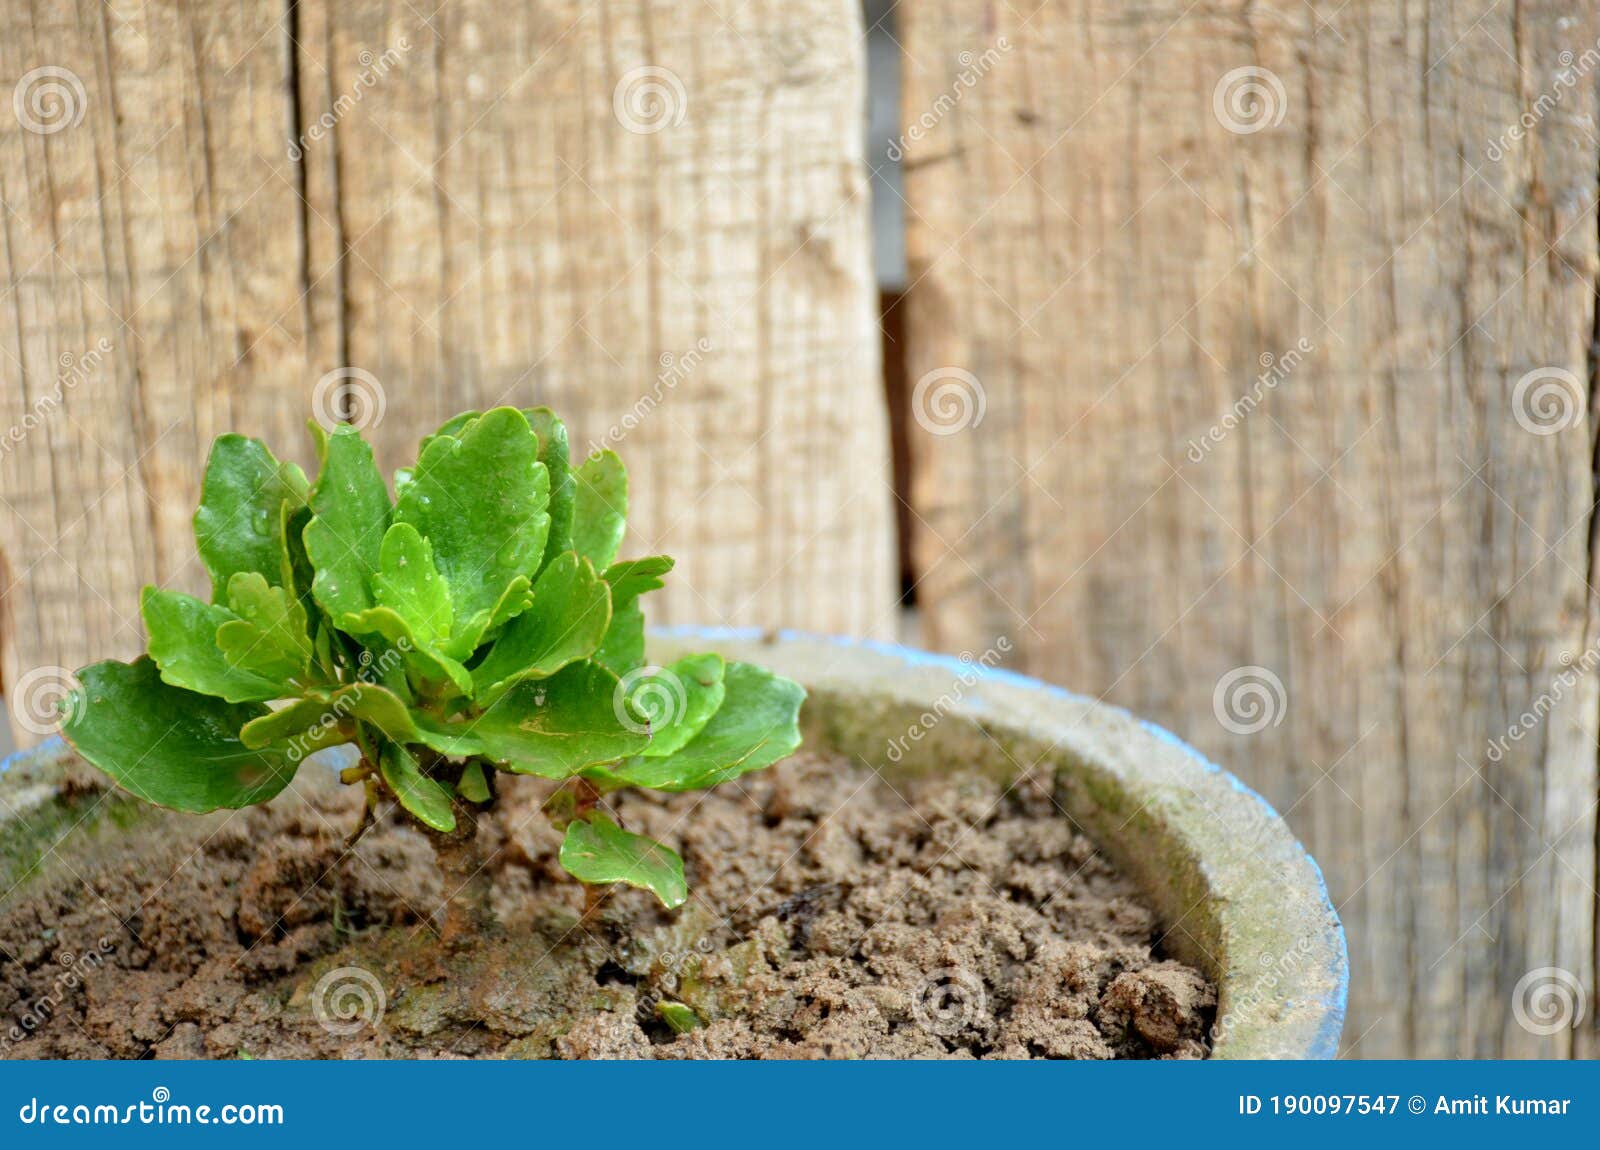 the green flower plant seedlings in  pote with wooden background.